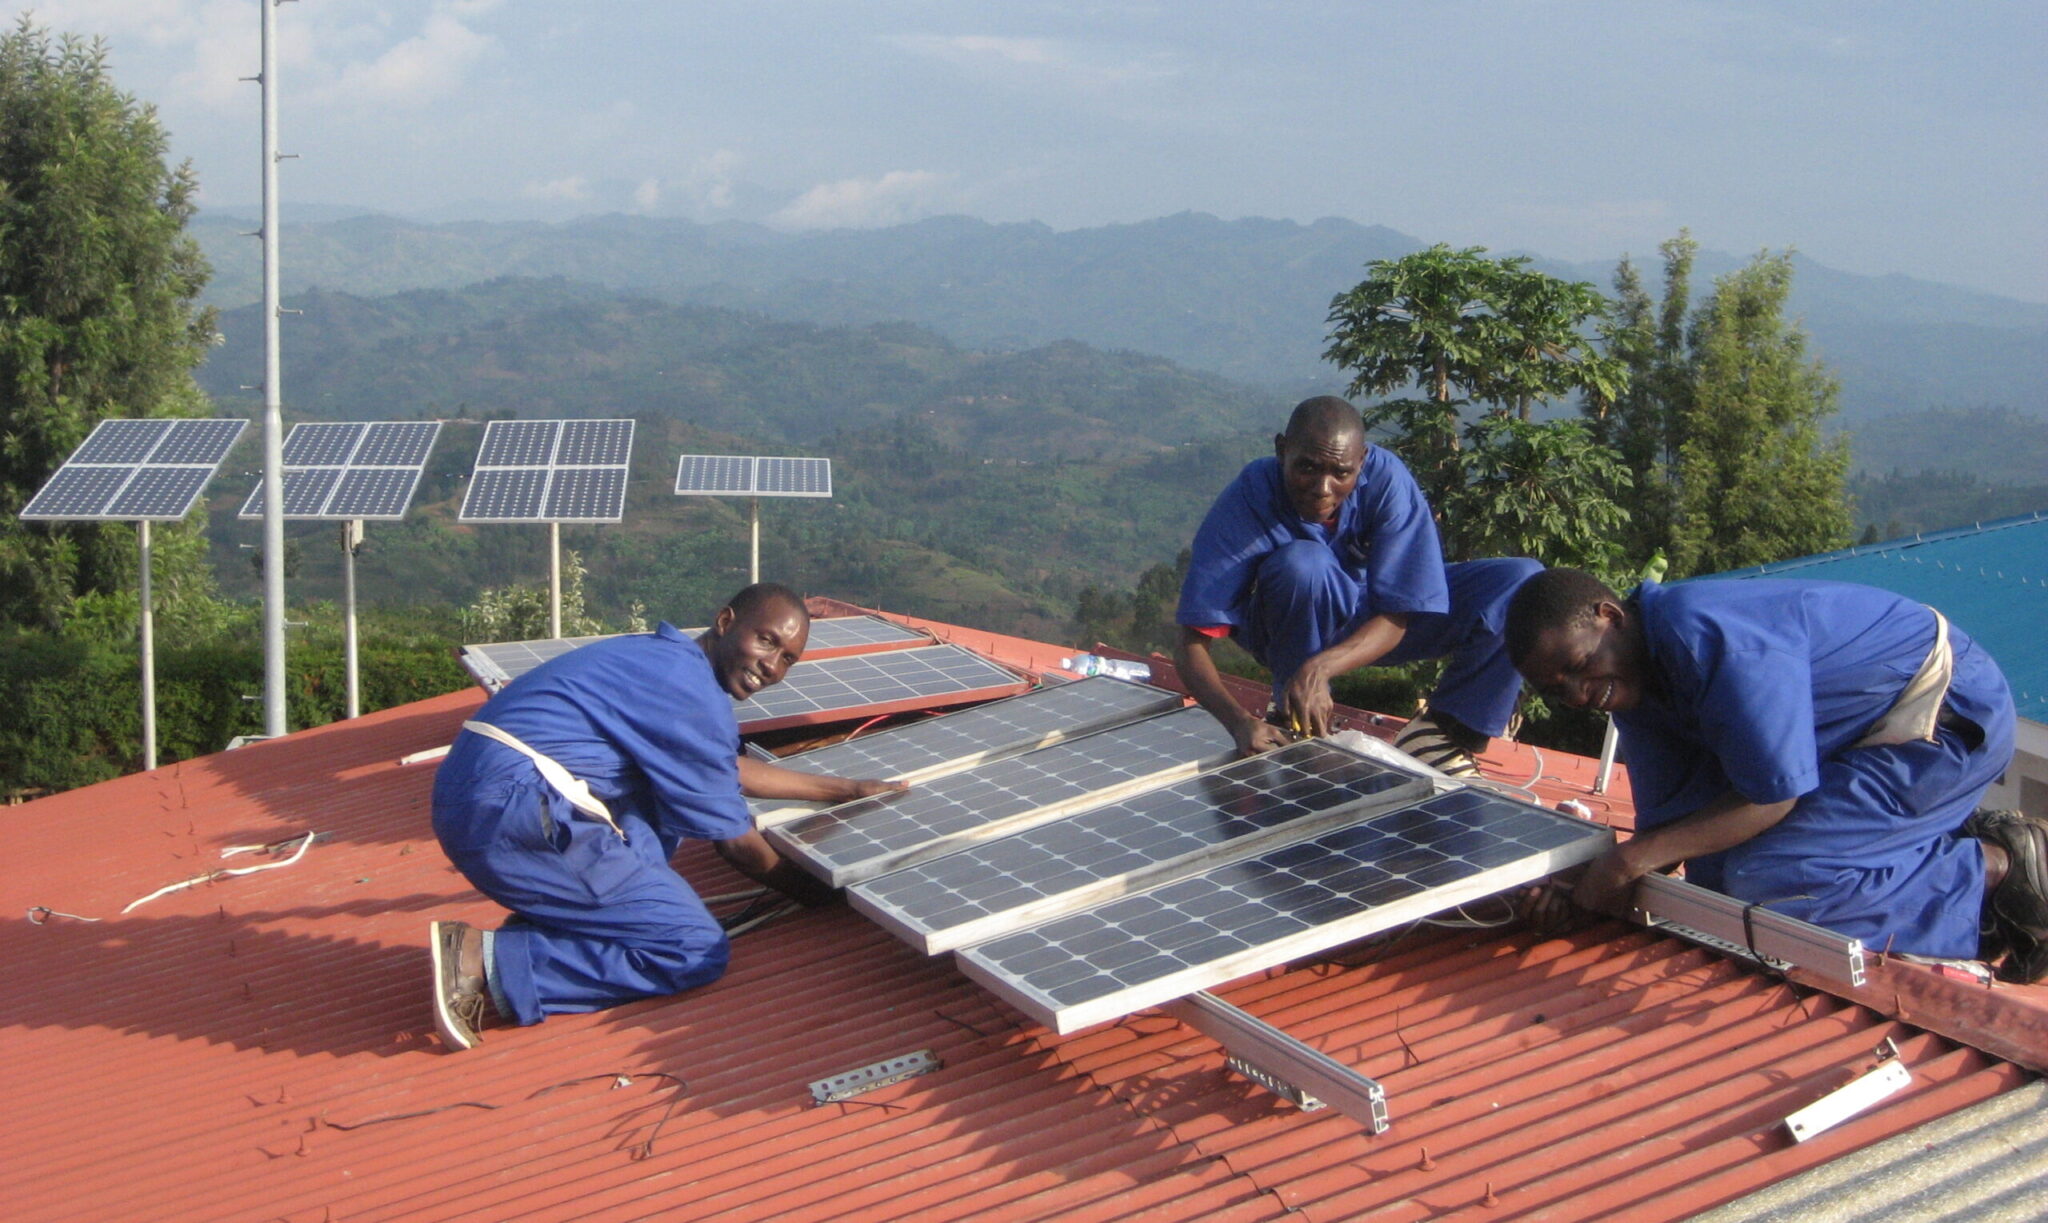 Technicians install rooftop solar panels as part of a rural energy access initiative.